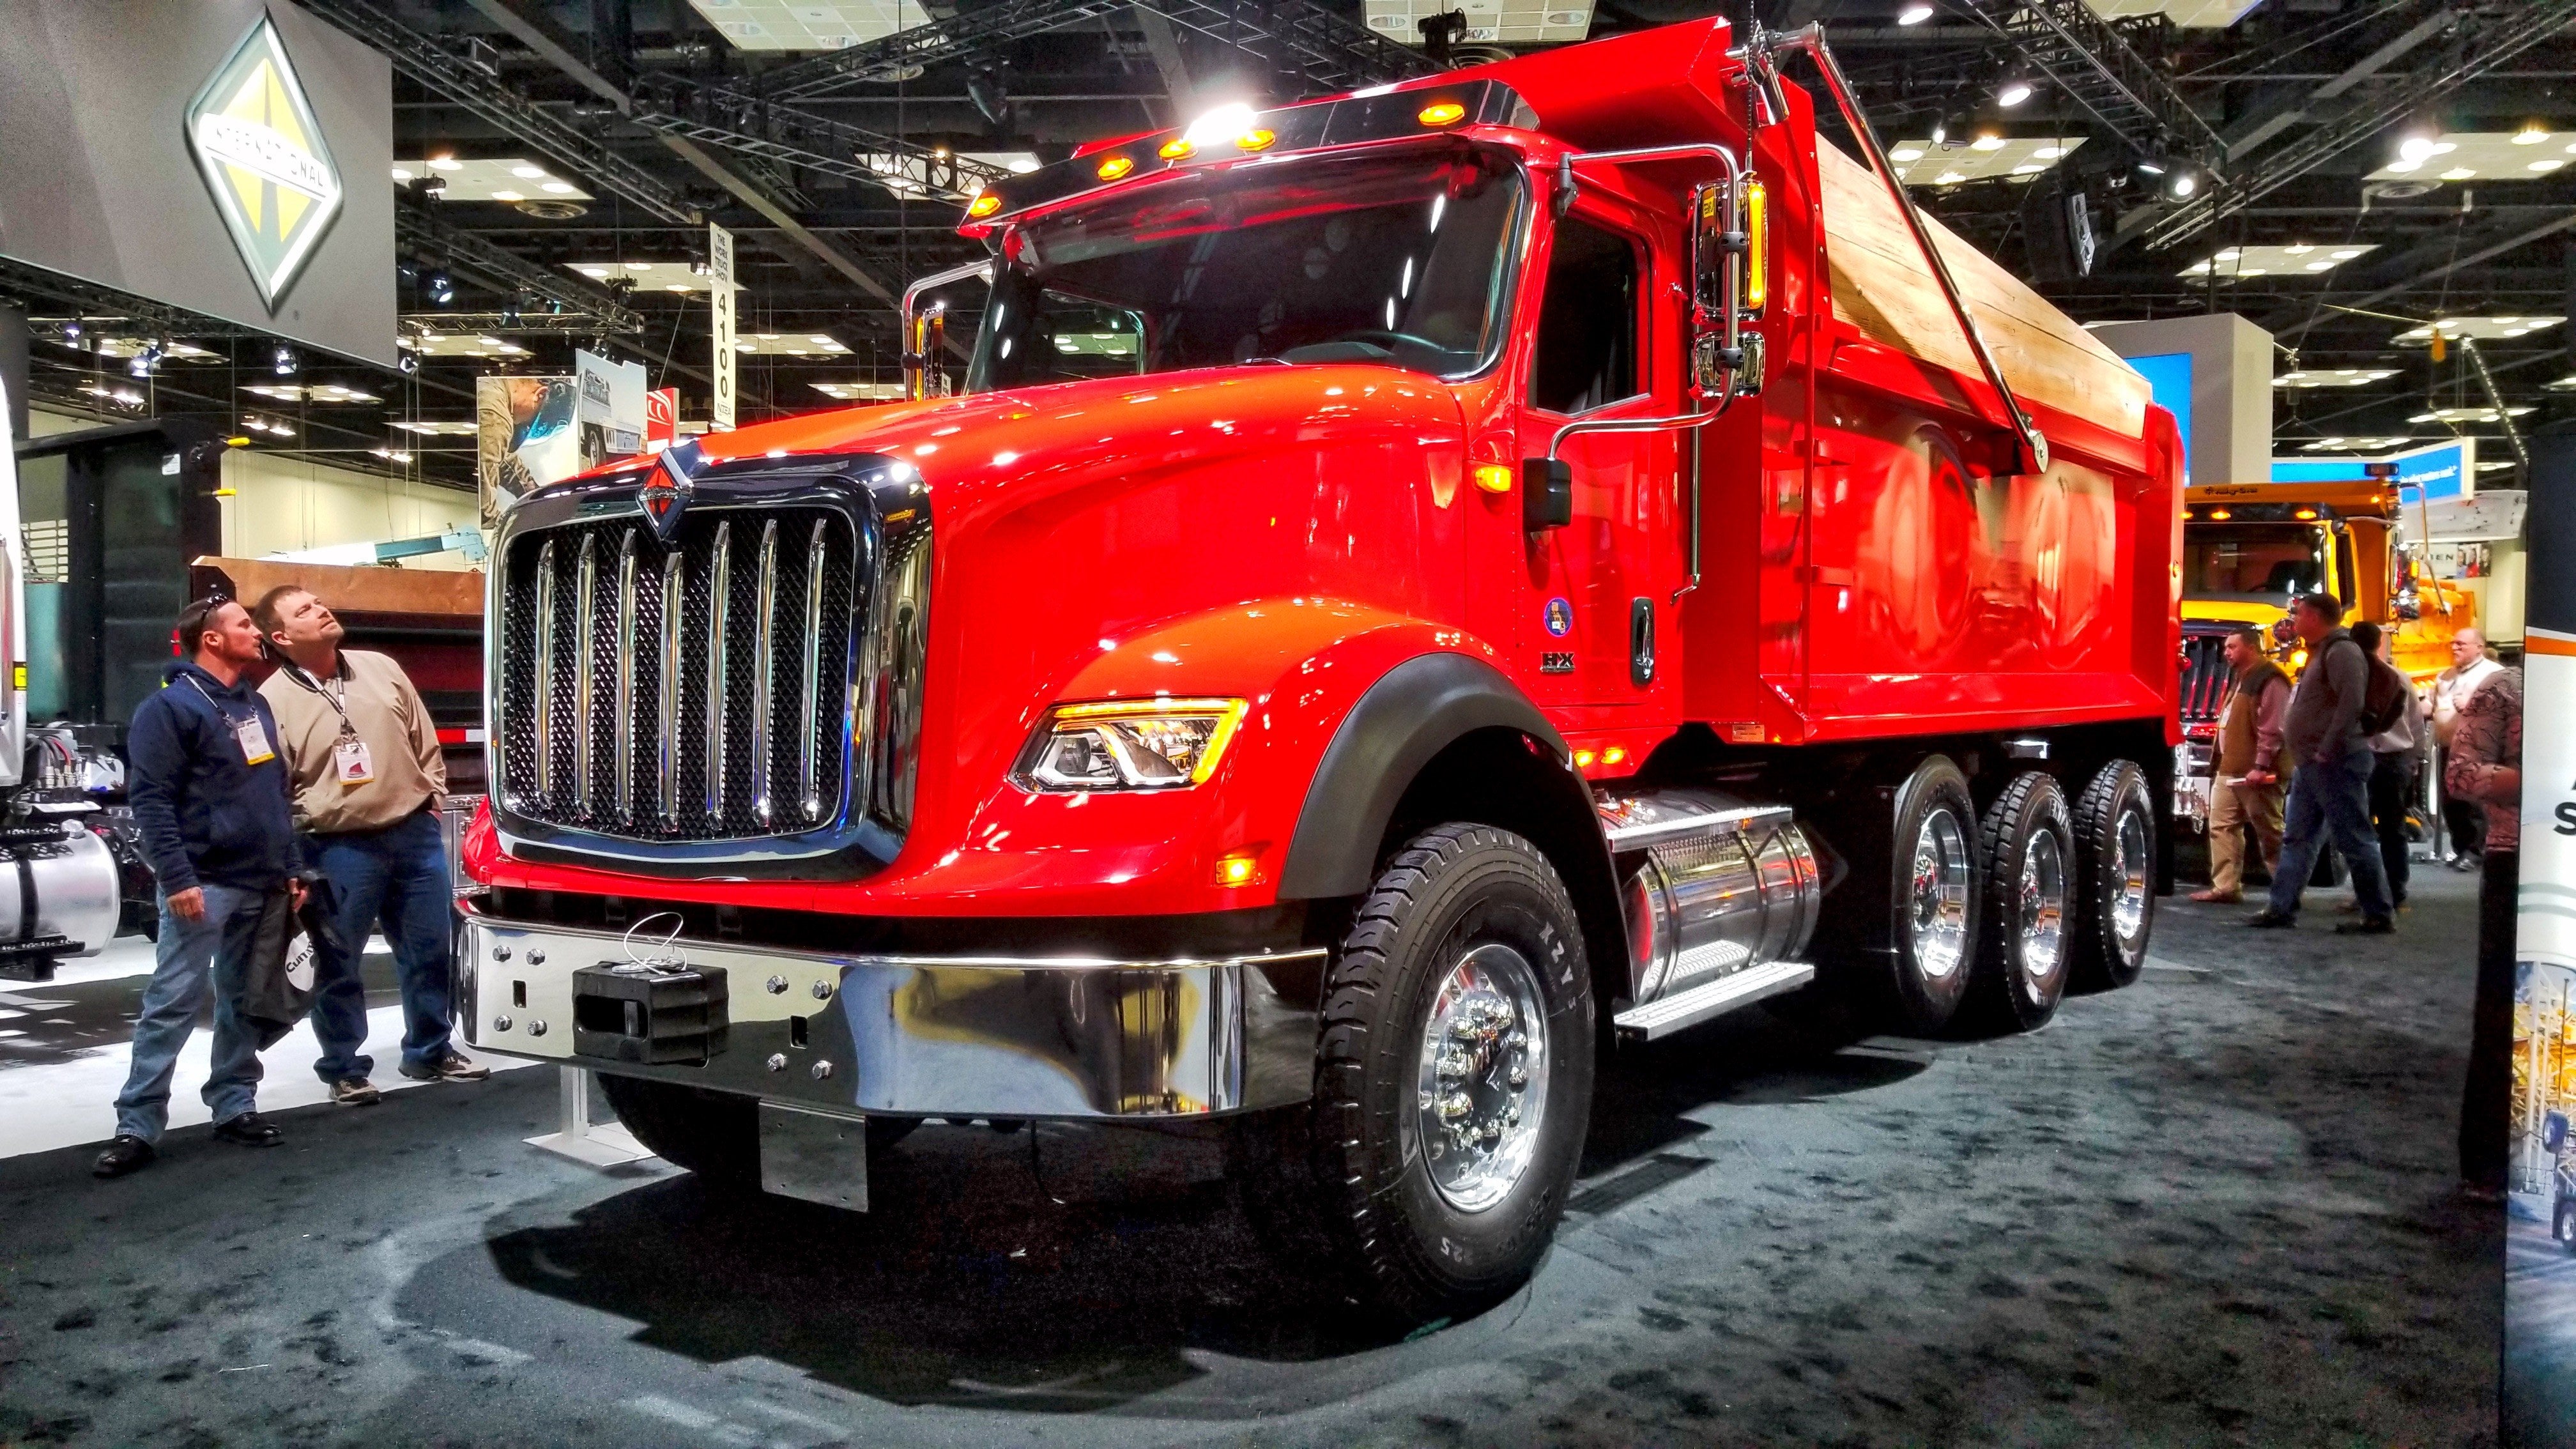 Top 10 Coolest Trucks We Saw at the 2018 Work Truck Show